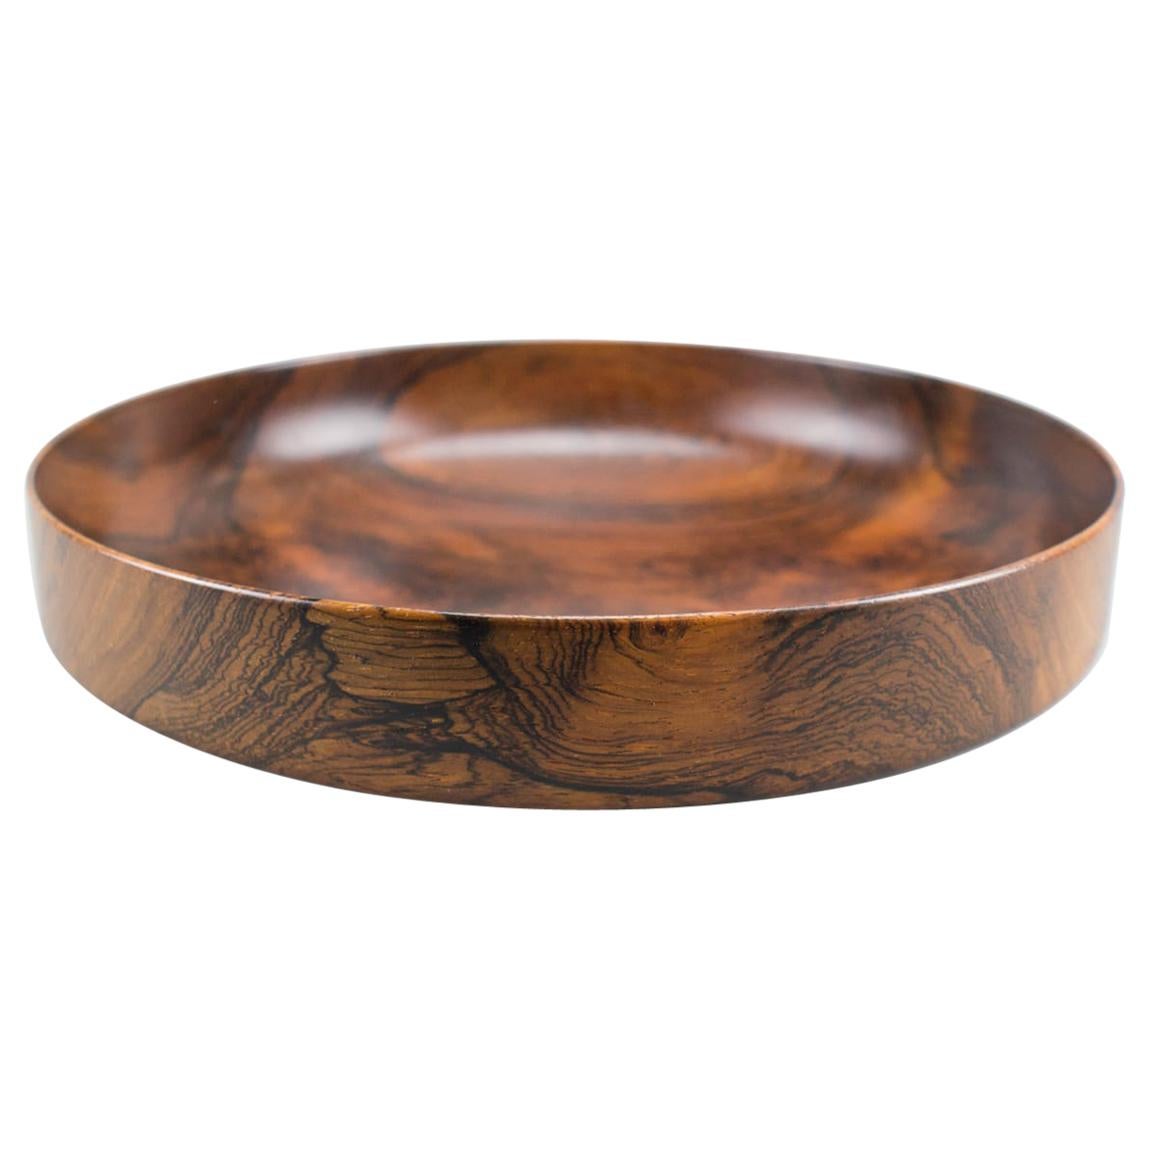 Awesome Mid-Century Modern Rosewood Bowl, 1960s